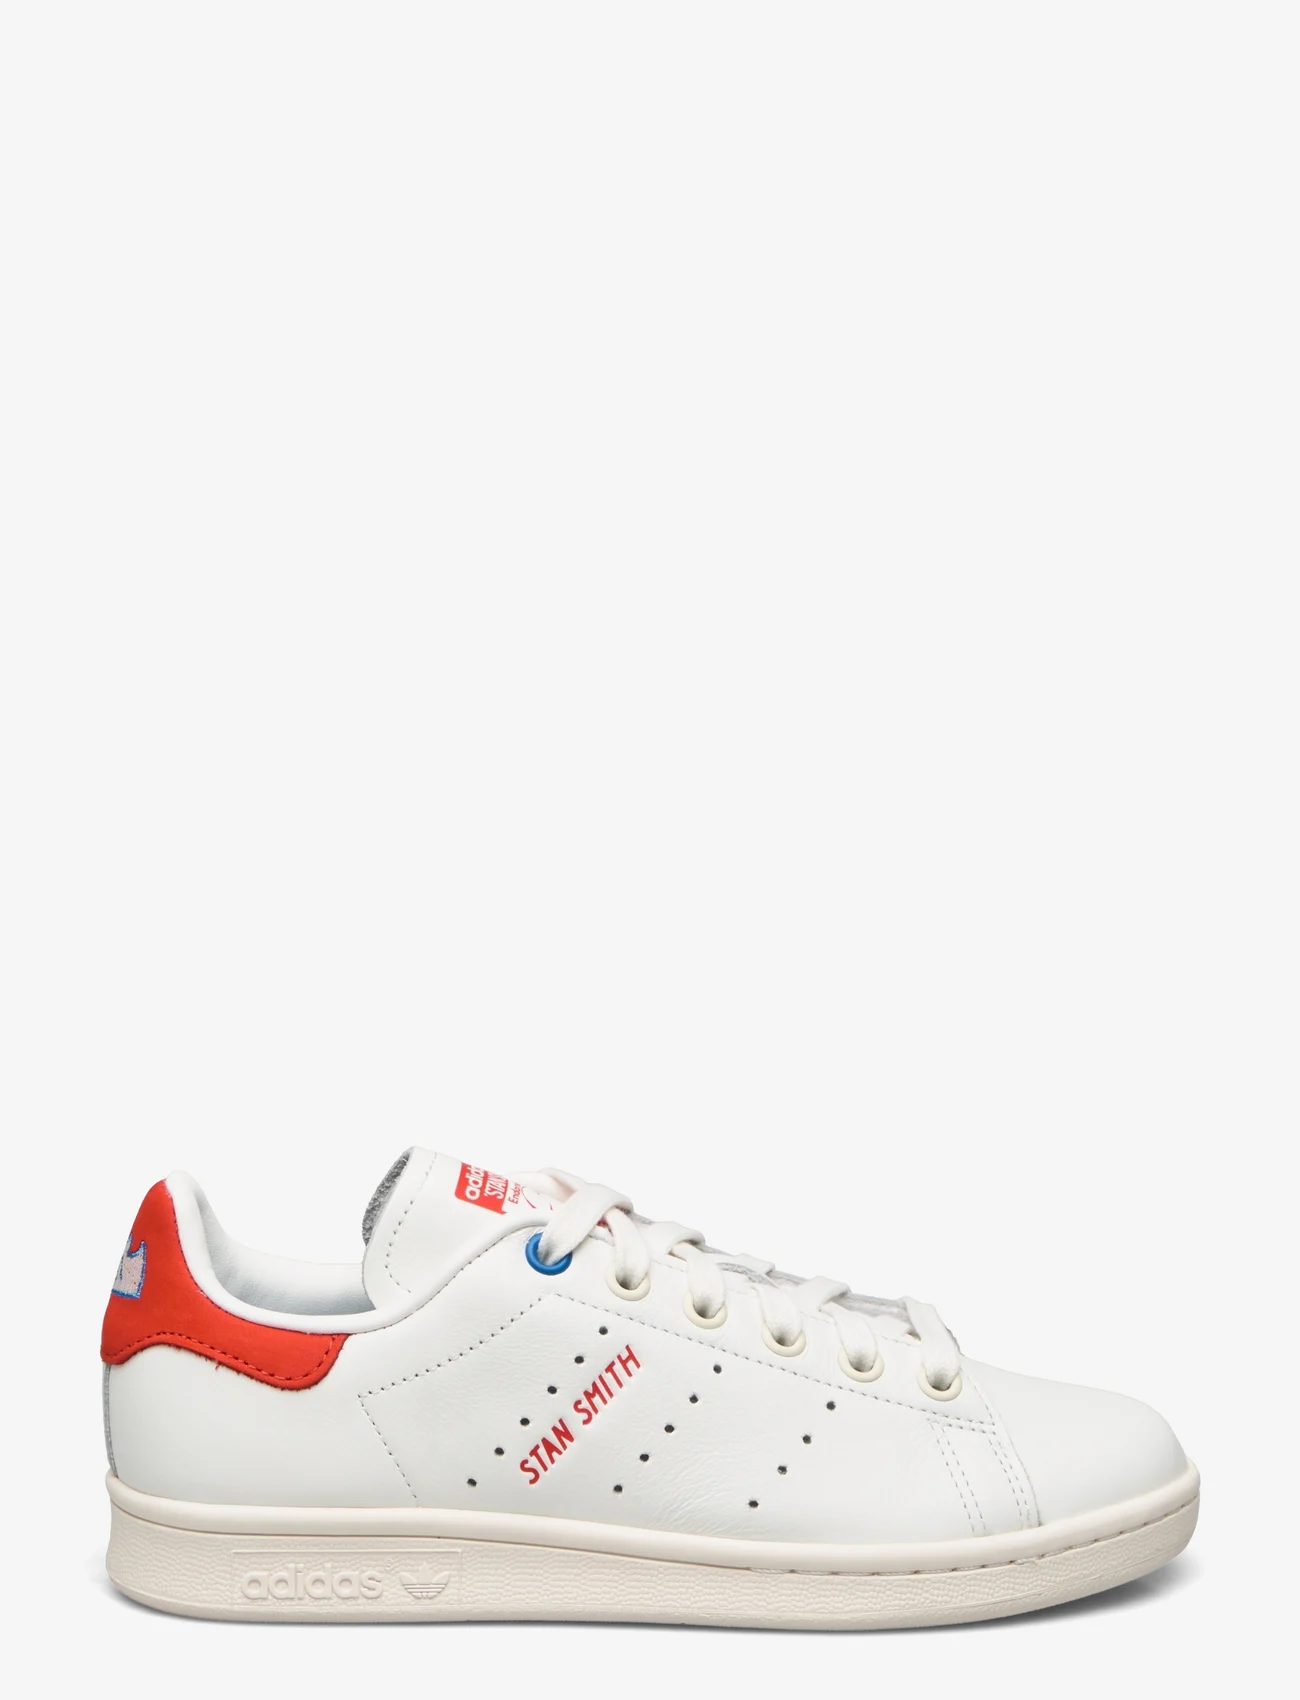 adidas Originals - STAN SMITH W - lage sneakers - cwhite/red/brblue - 1